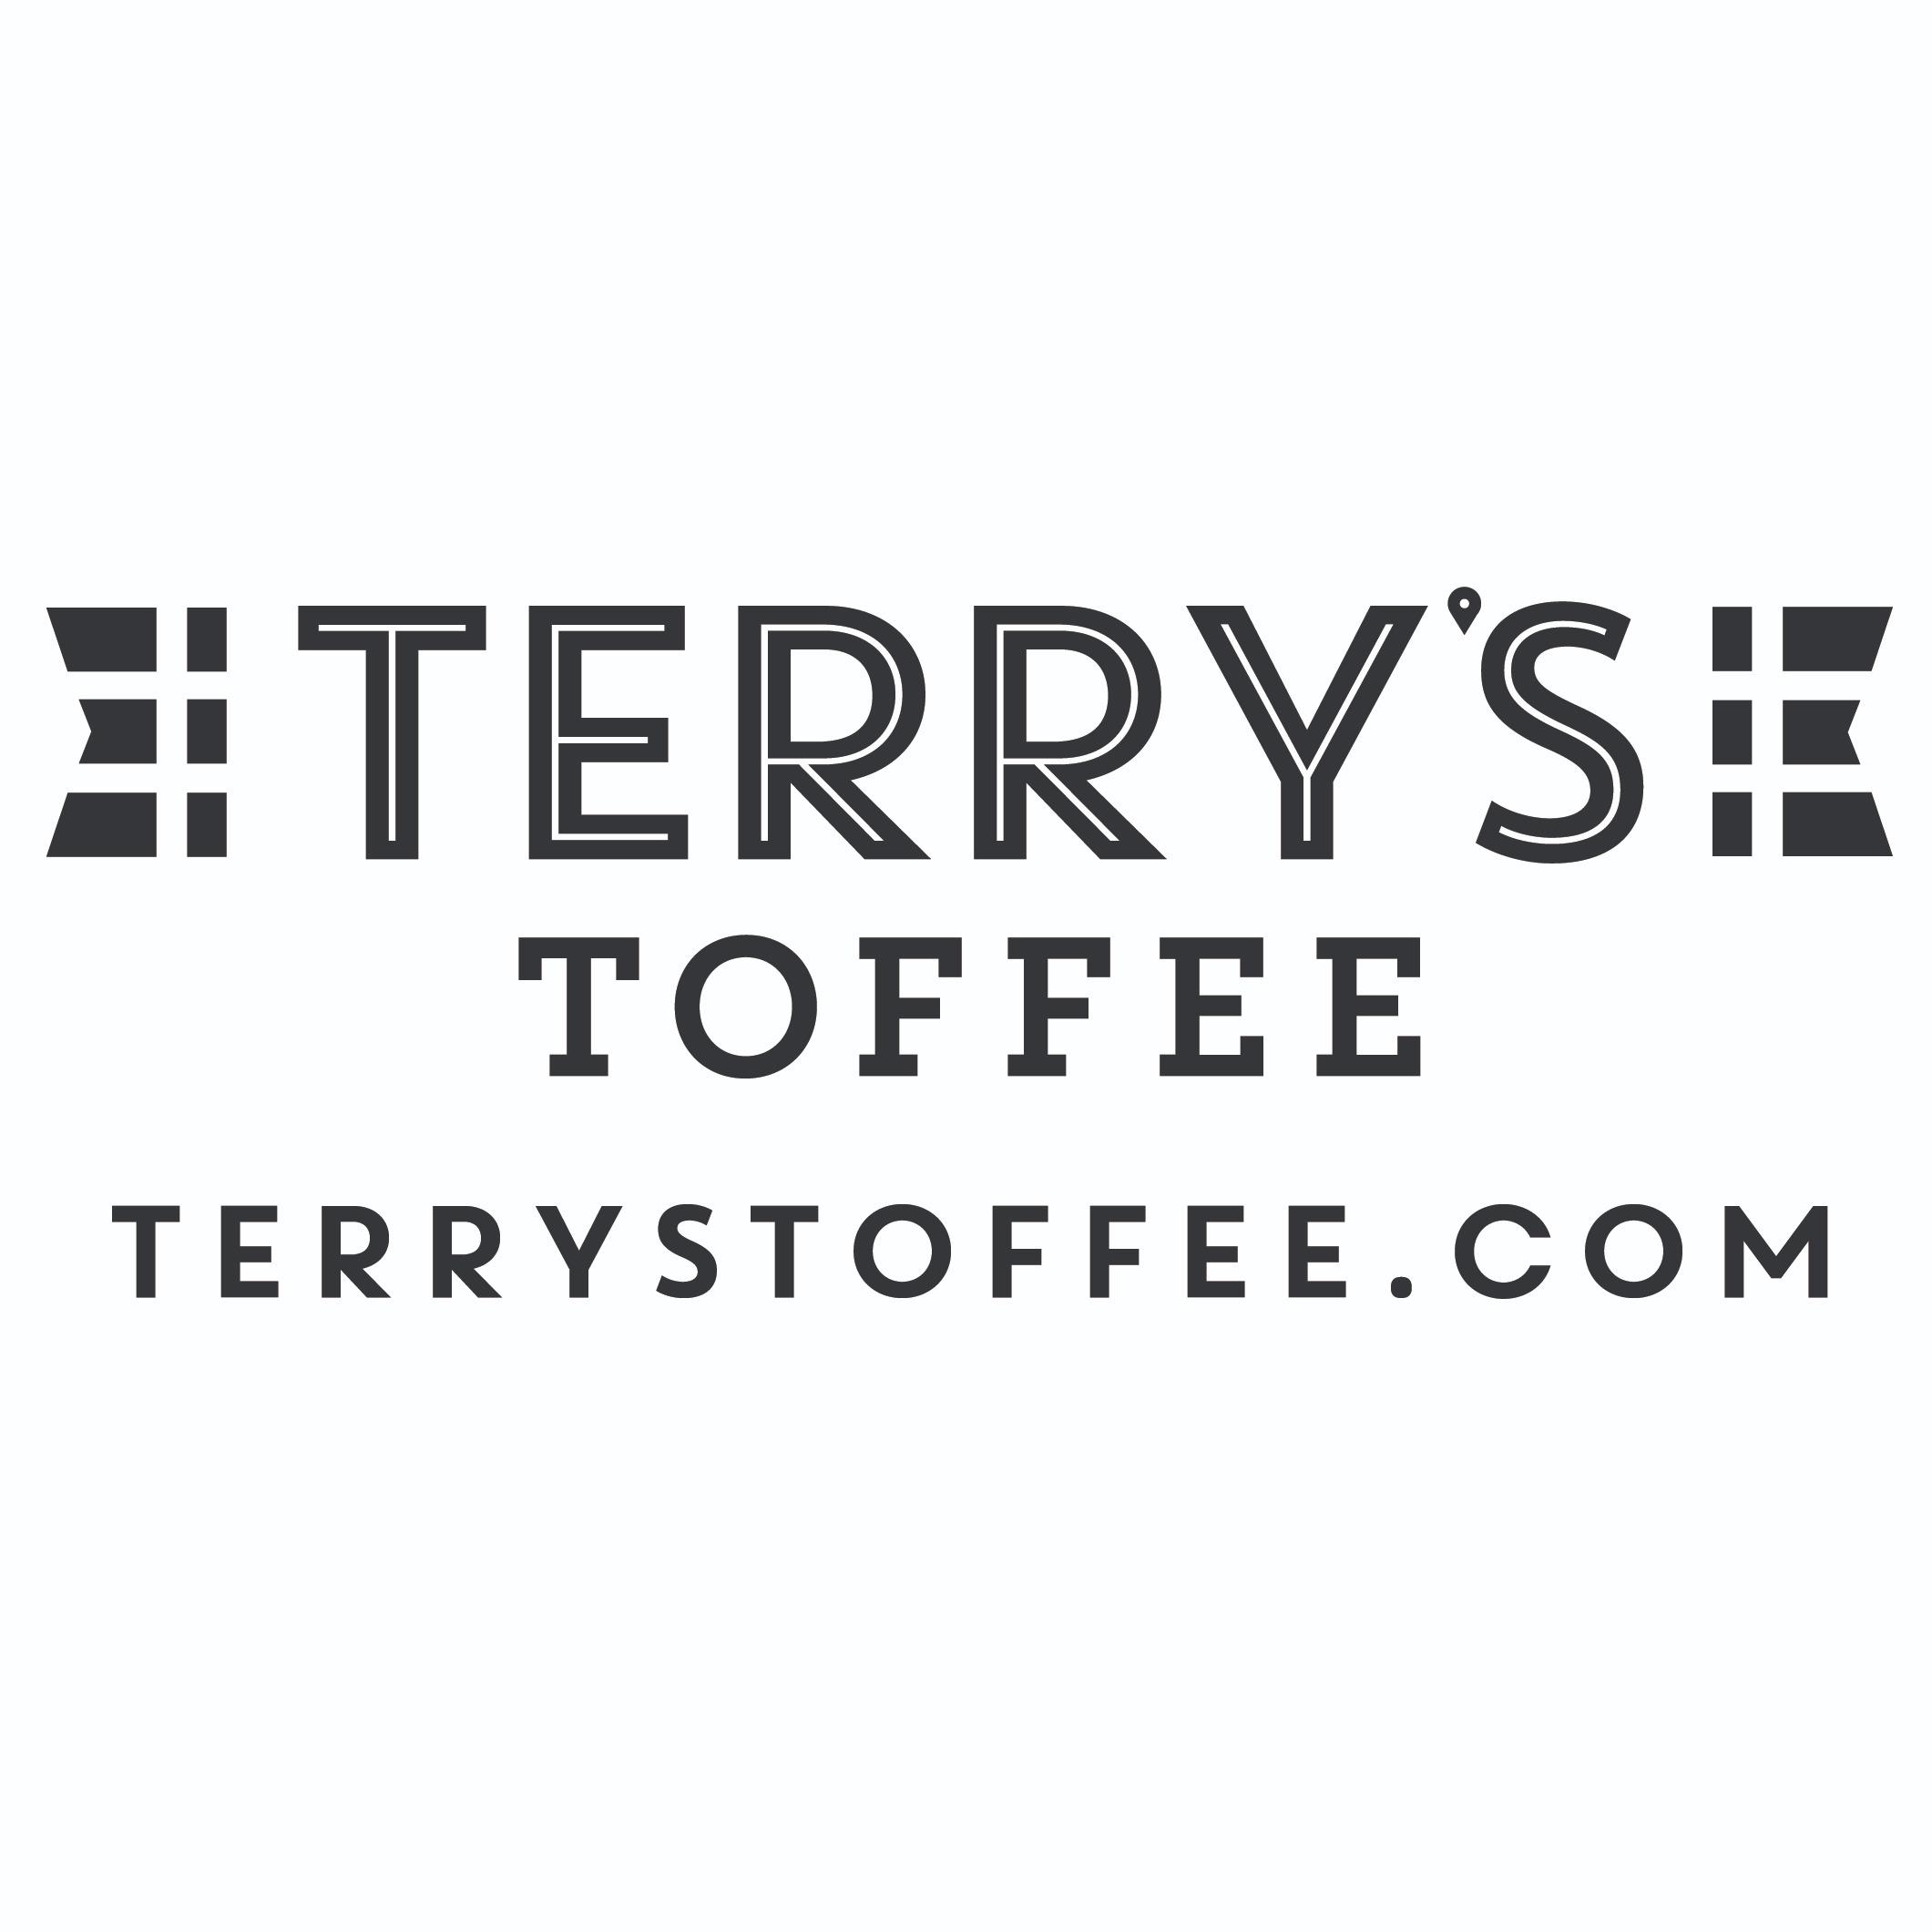 Terry's Toffee - Highland Park, IL 60035 - (312)733-2700 | ShowMeLocal.com